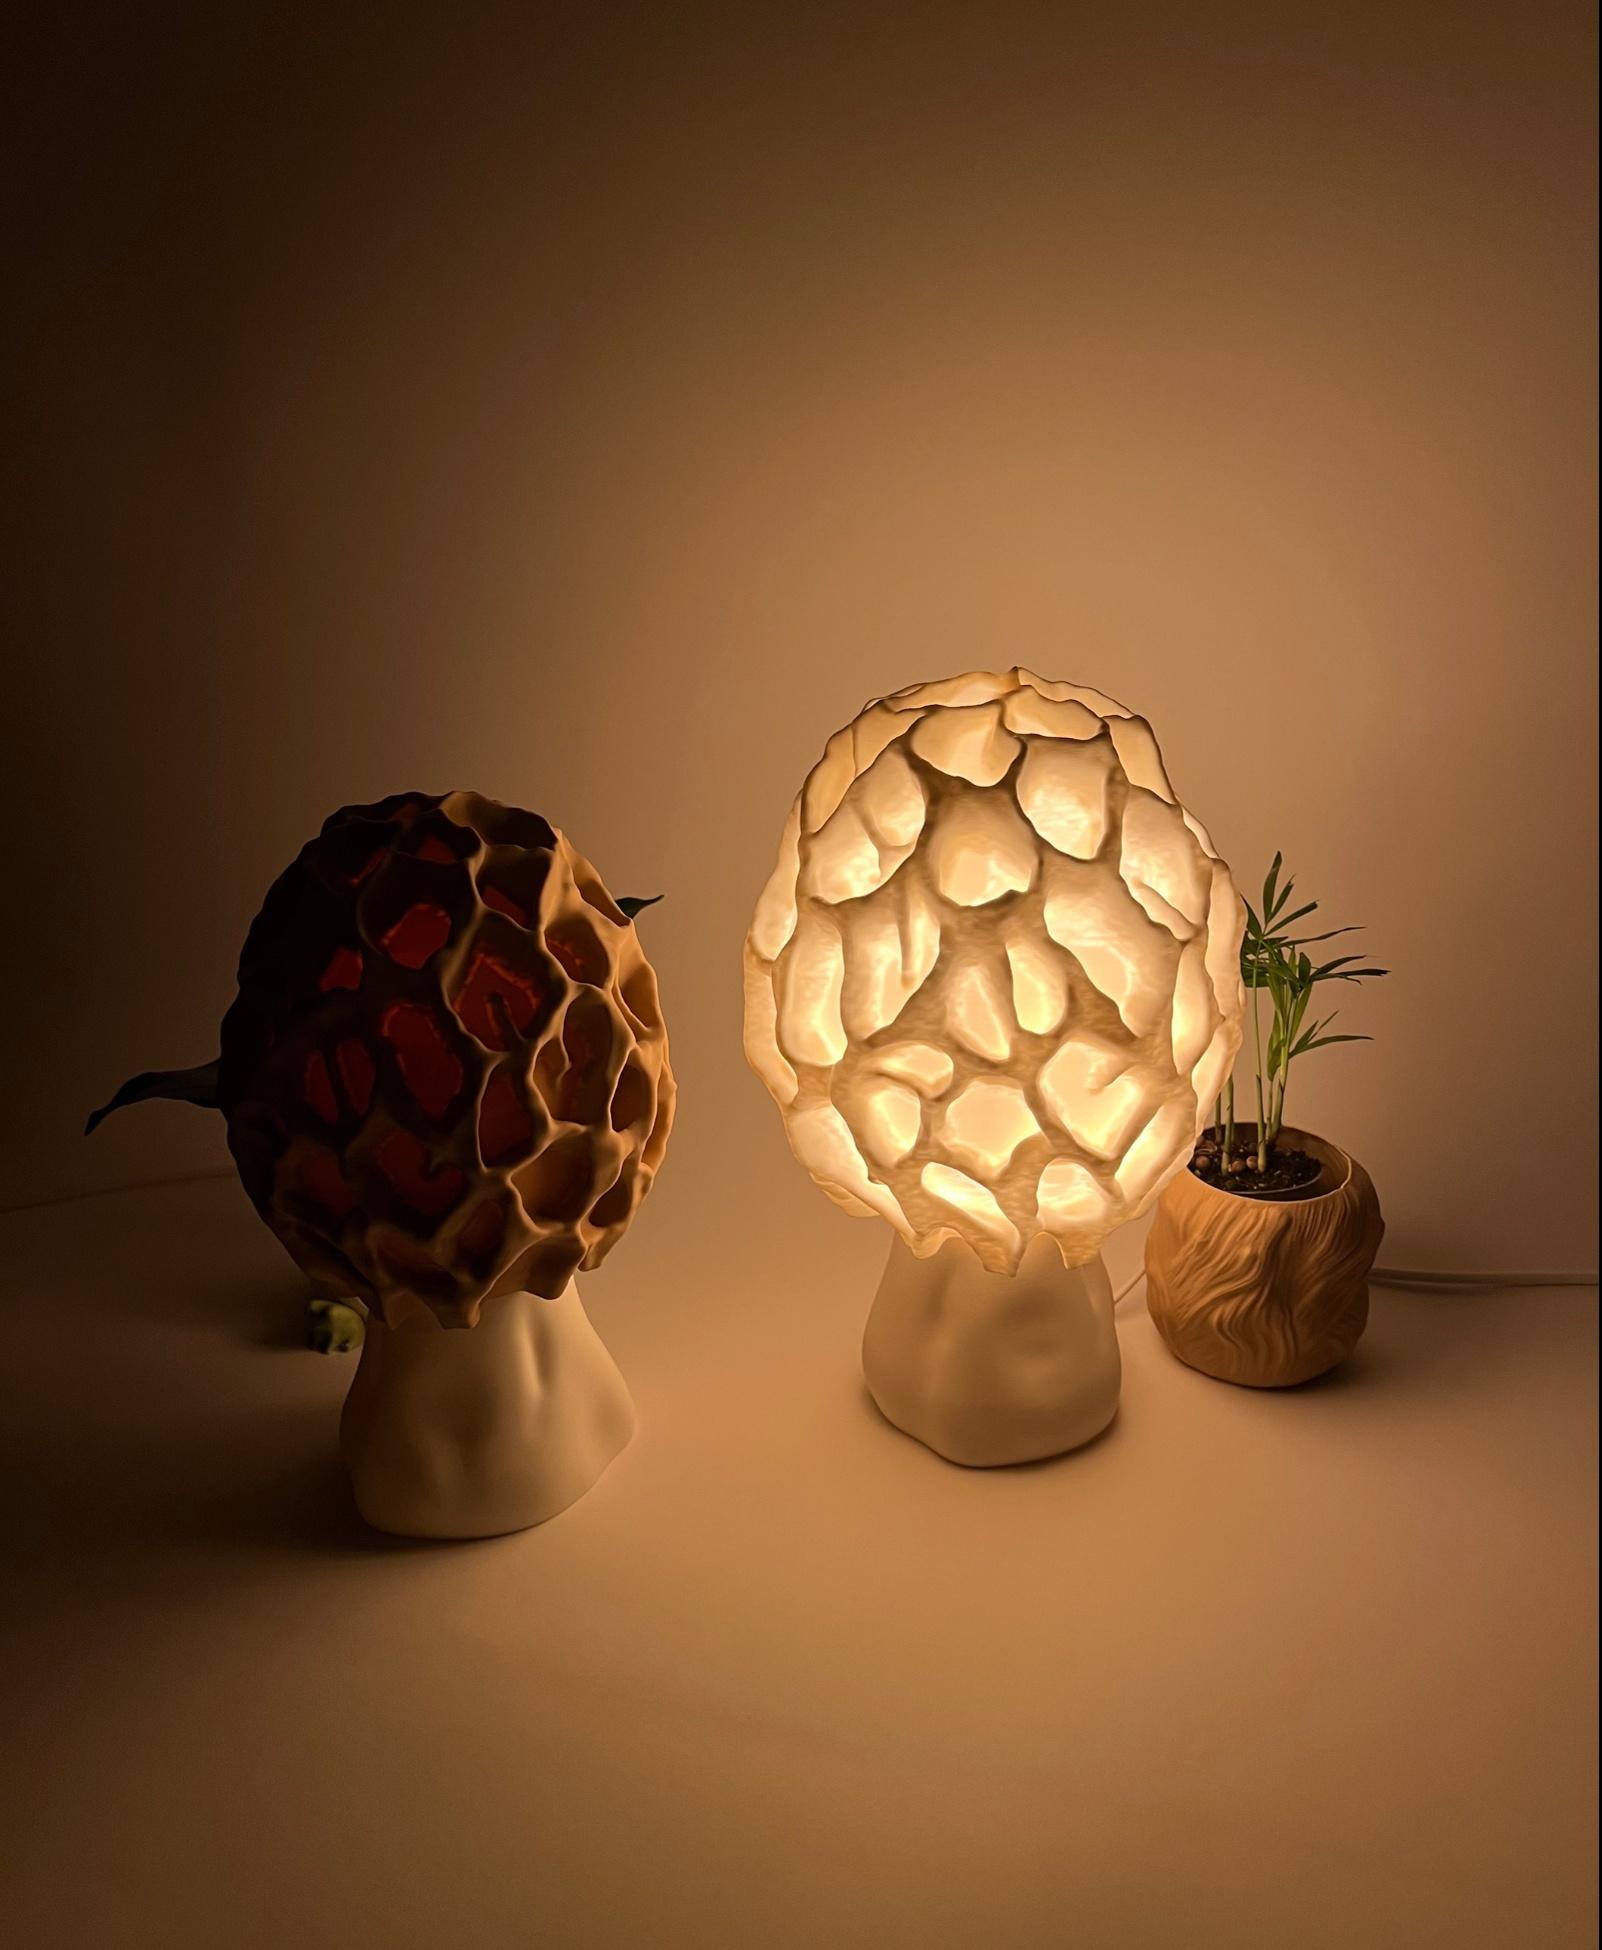 Table lamp “Esculenta Fungus” - This Morchellamp is one of the nicest table lamps that we right now have! The light itself is evenly distributed through out the whole room. Thanks to the softening effect it gives chille vibes. We definitly enjoy the design by gazzaladra a lot. Thanks a lot! - 3d model